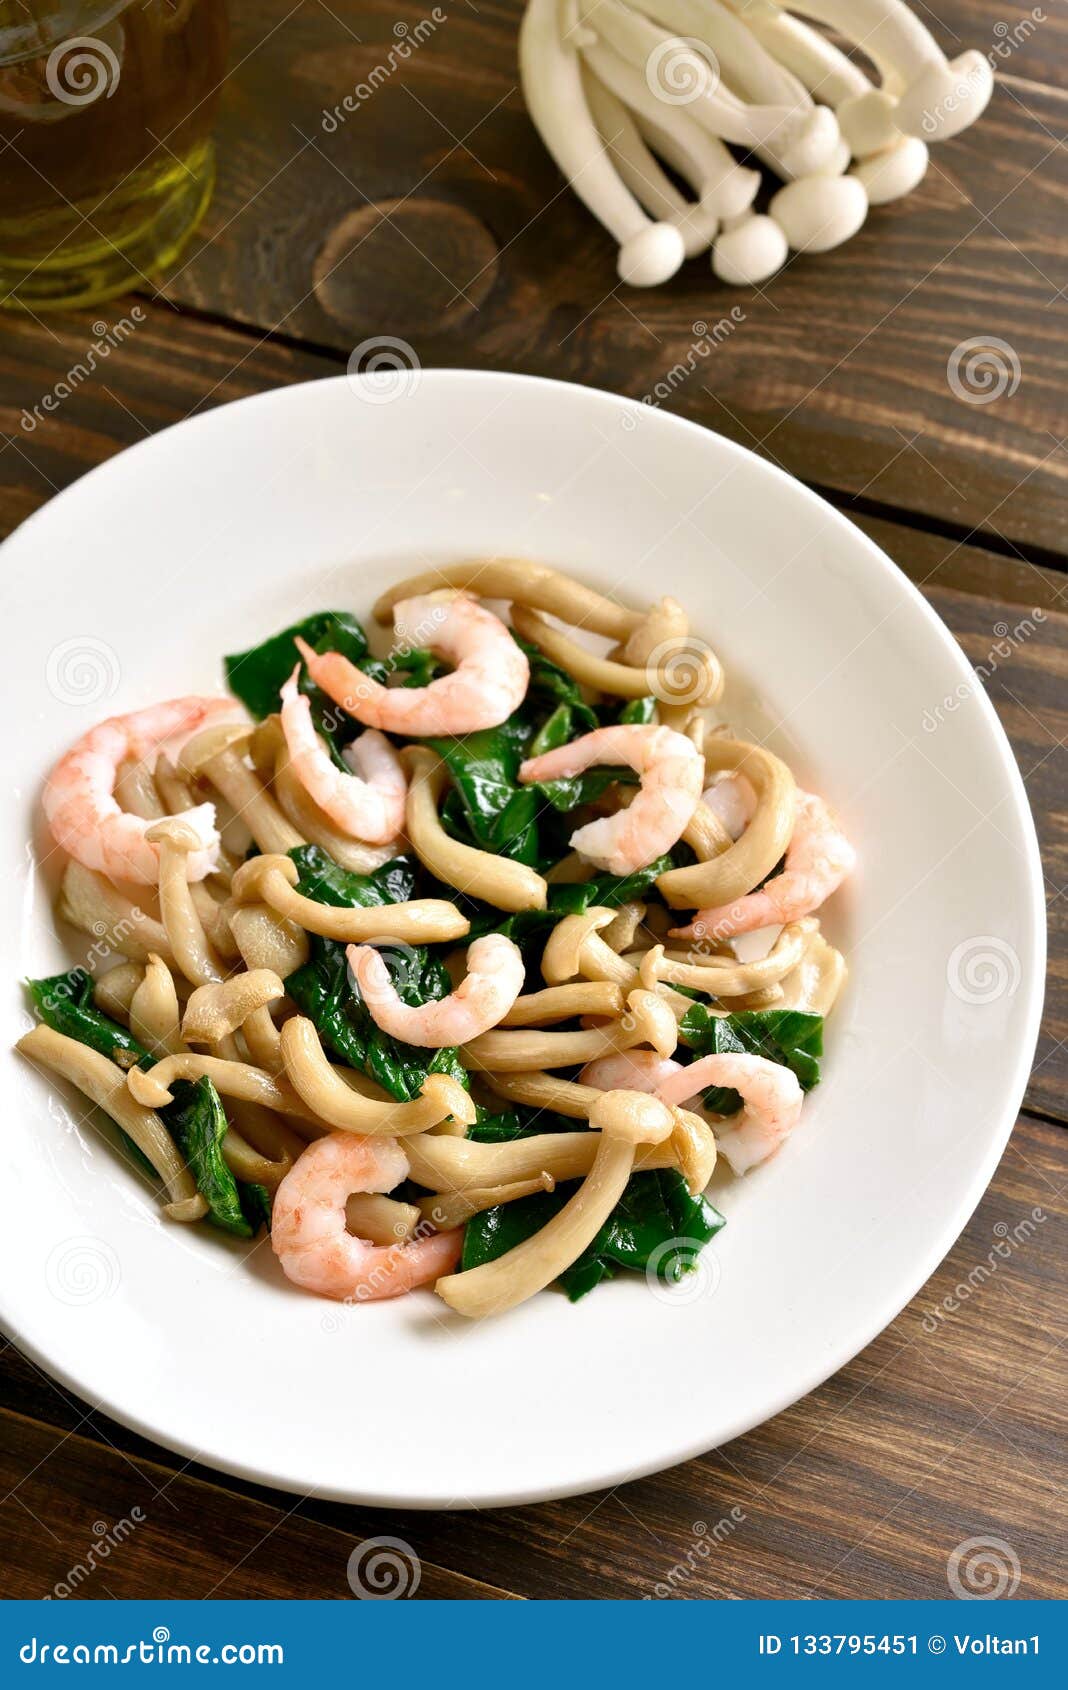 White Beech Mushrooms with Leaves of Spinach and Shrimps Stock Image ...